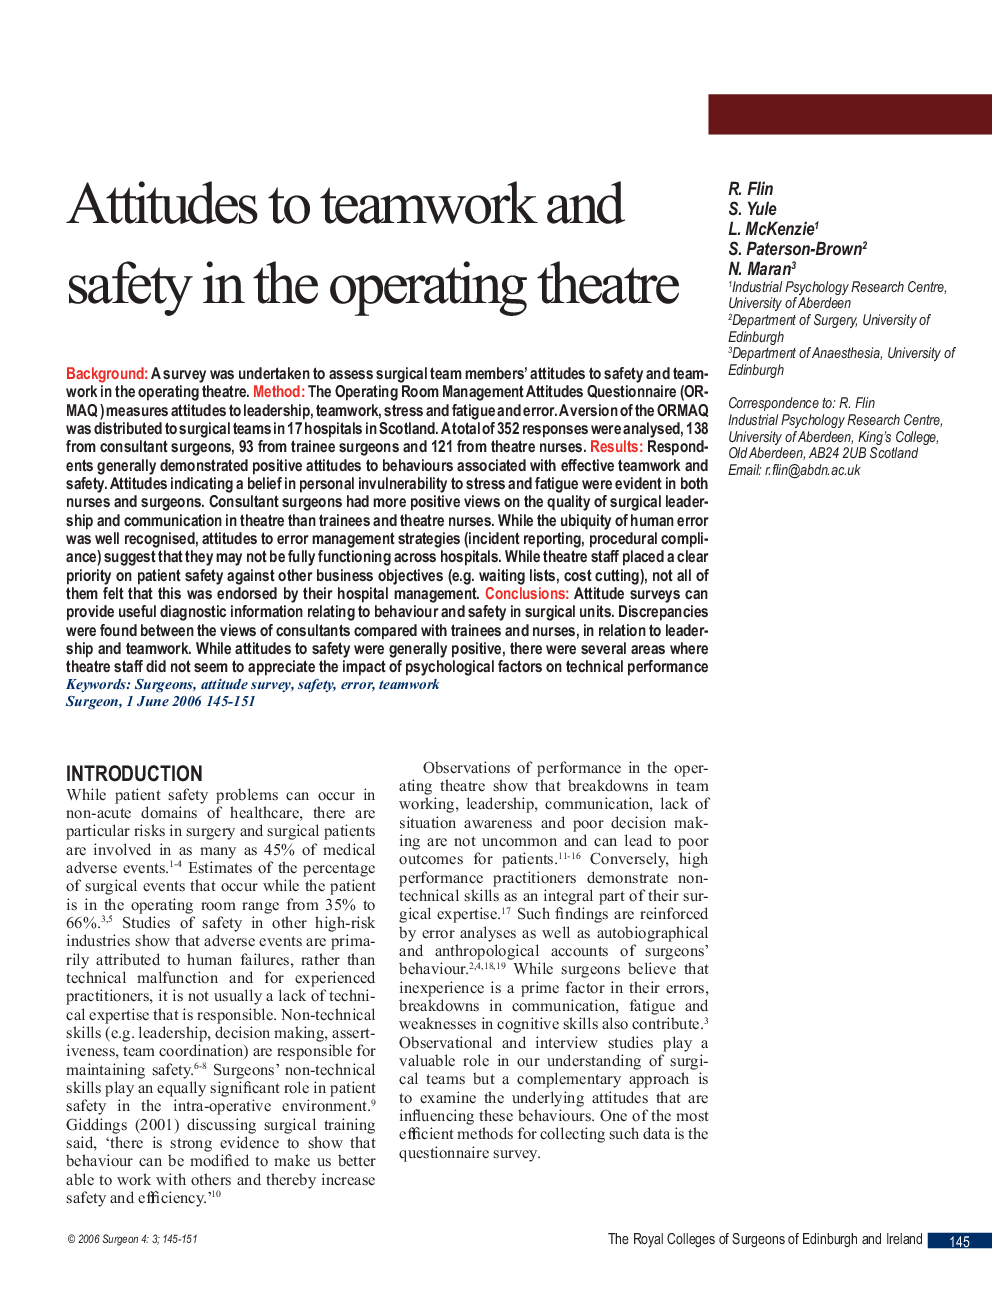 Attitudes to teamwork and safety in the operating theatre